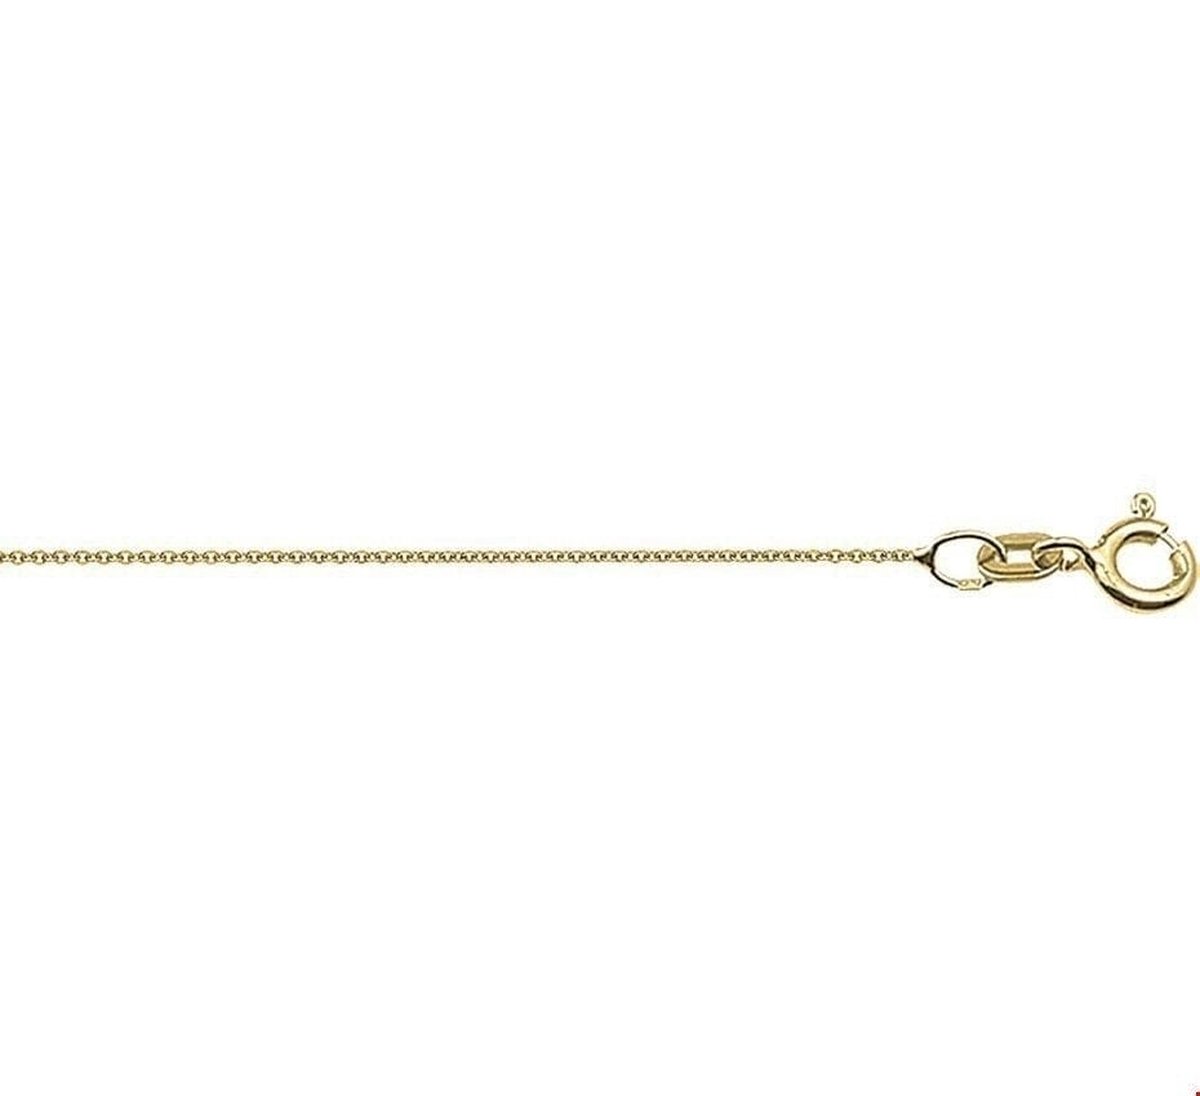 The Jewelry Collection Ketting Anker Rond 0,8 mm 42 cm - Goud - The Jewelry Collection